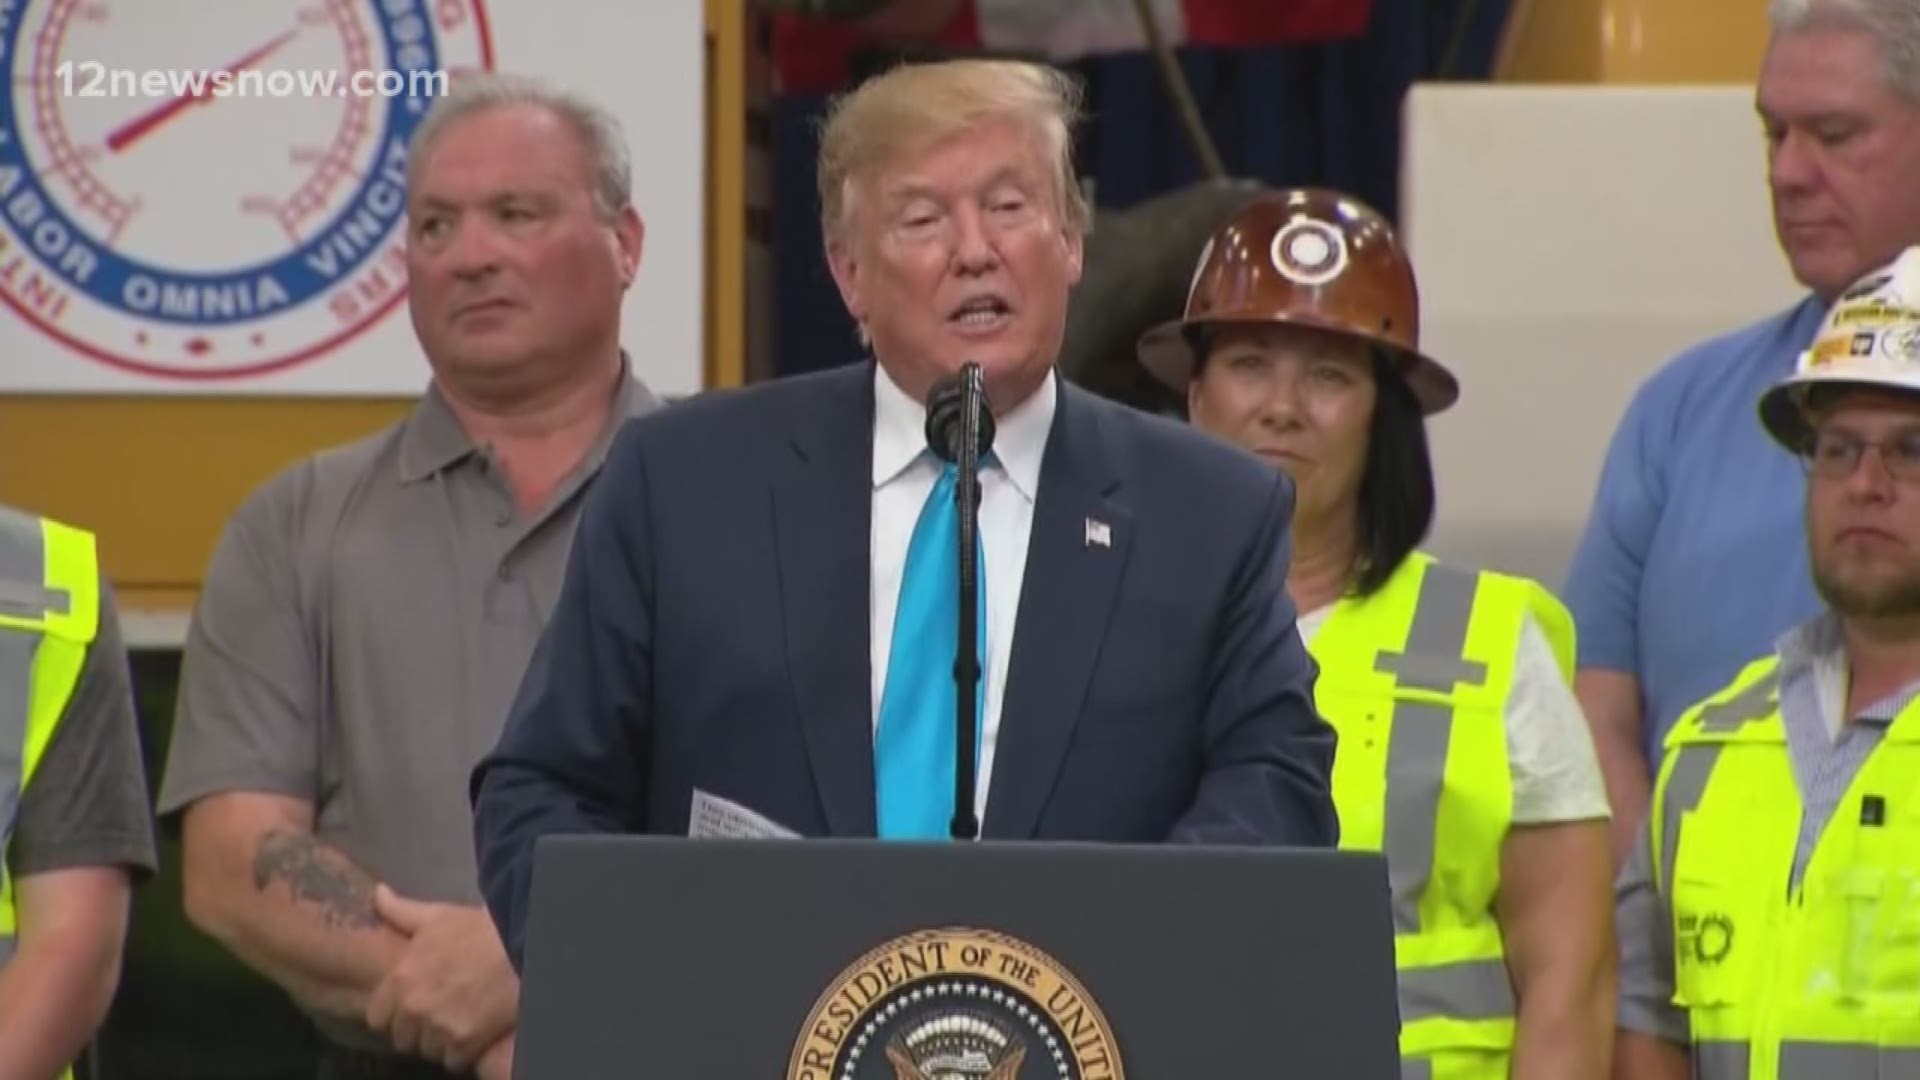 President Trump is scheduled to tour Sempra Energy's Cameron lng export facility Tuesday in Louisiana. He's expected to talk about the facilities, job creation and focus on energy infrastructure.